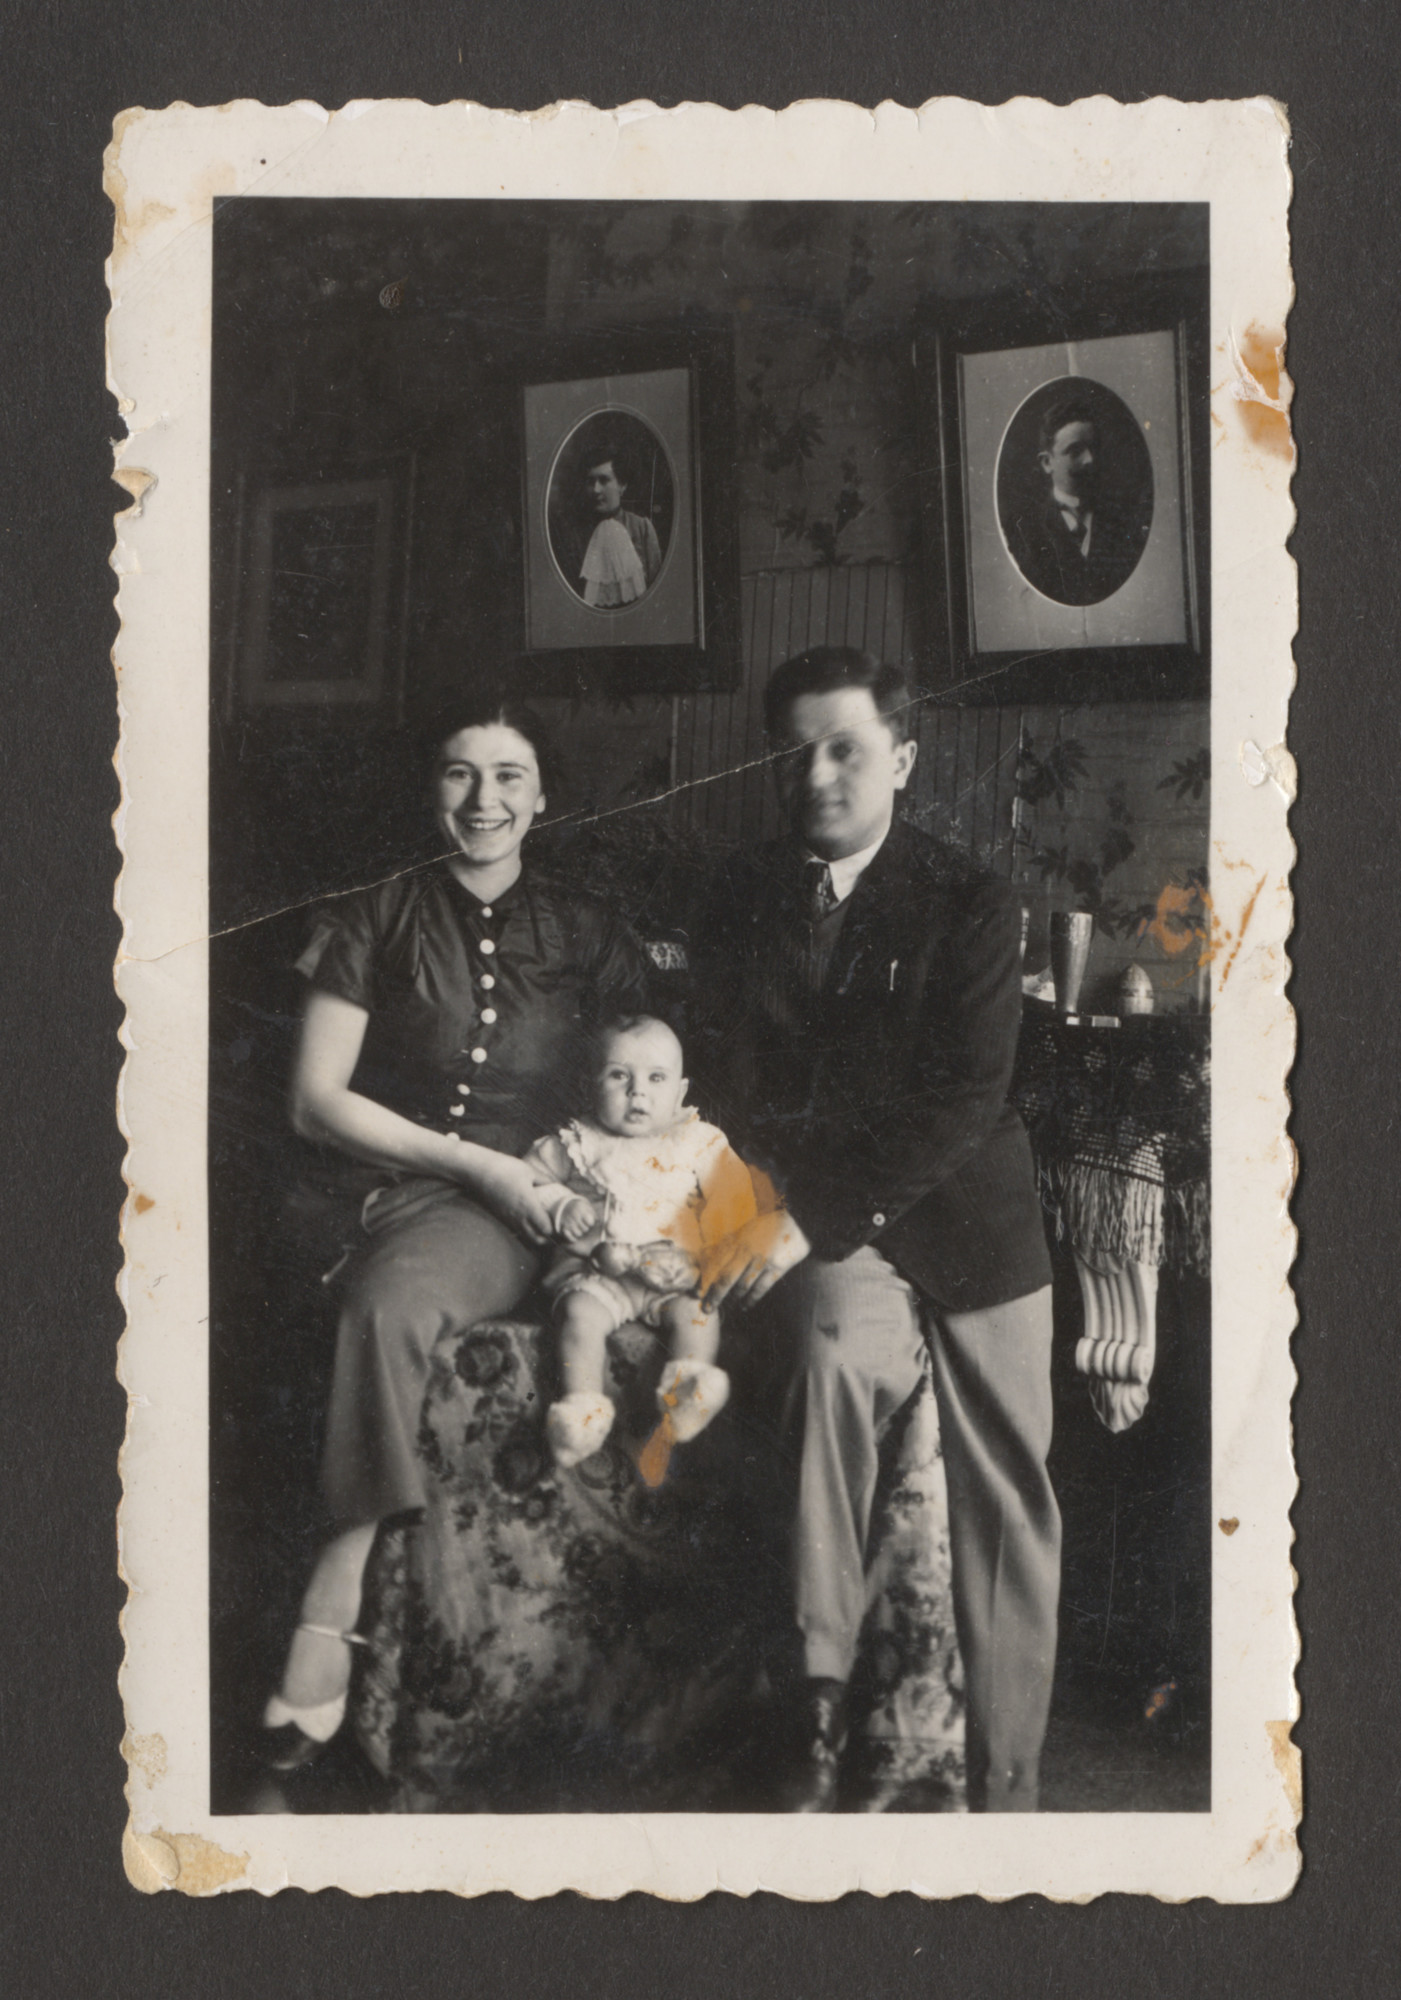 Portrait of a Belgian Jewish family.

Pictured are Maria and Leon Srebnik with their infant son Charles.